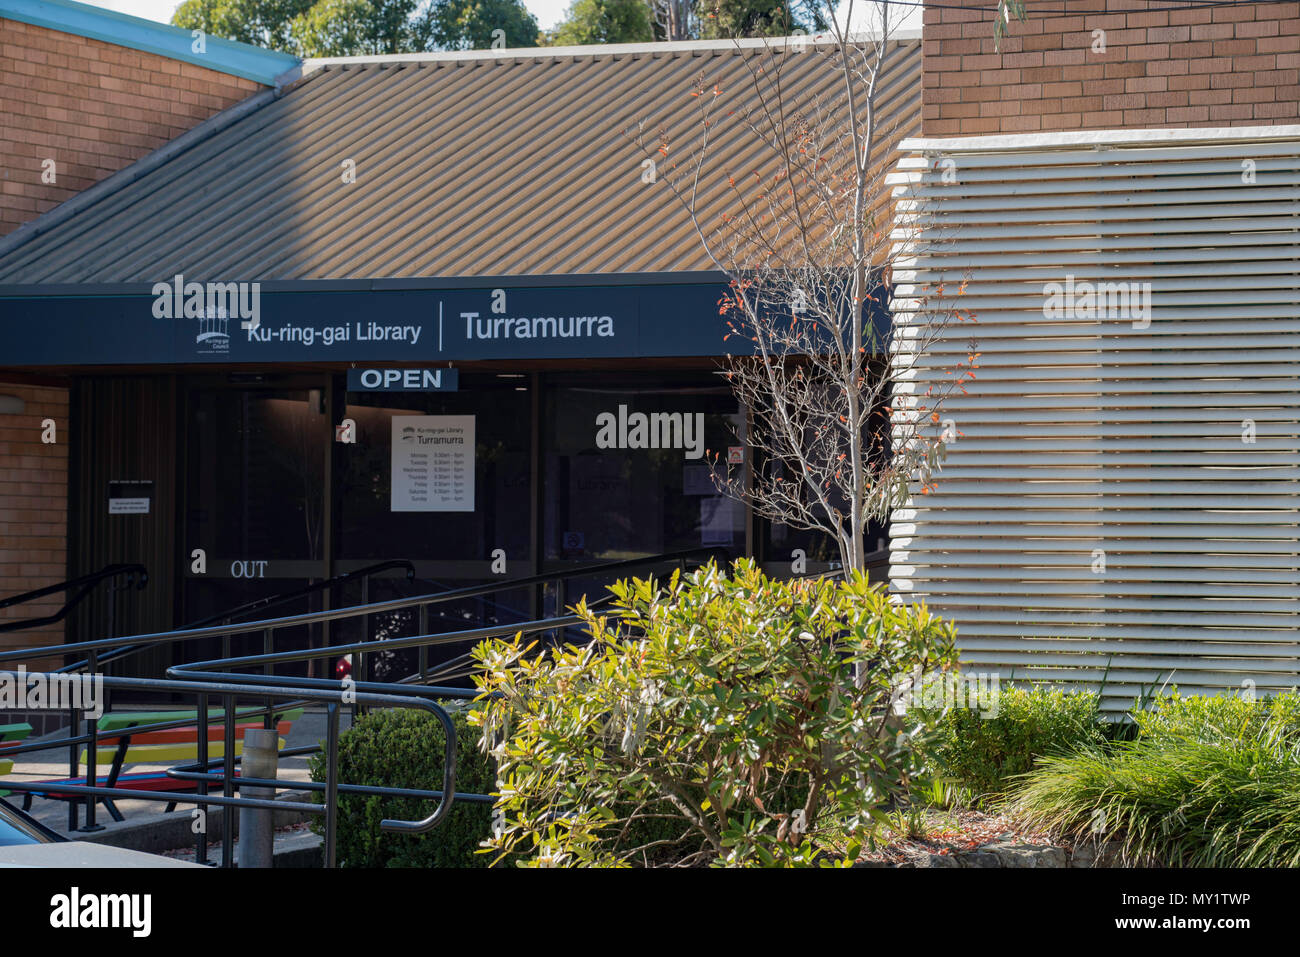 Ku-Ring-Gai Community Library in Turramurra. Libraries in Sydney have evolved with time and are busier than ever with people young and old. Stock Photo